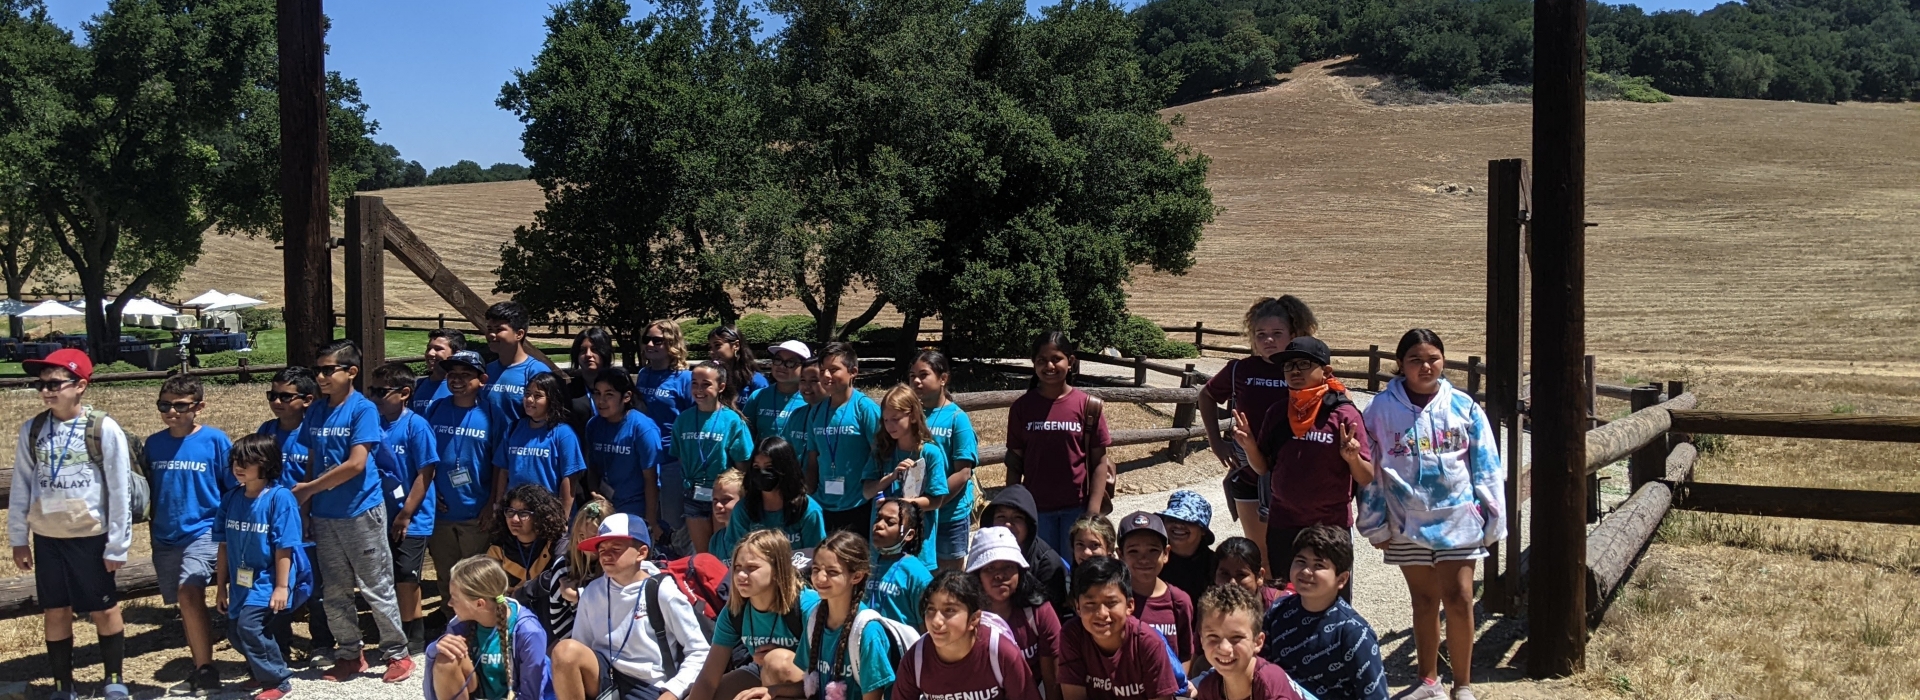 Simi Valley Girl Scout Day Camp